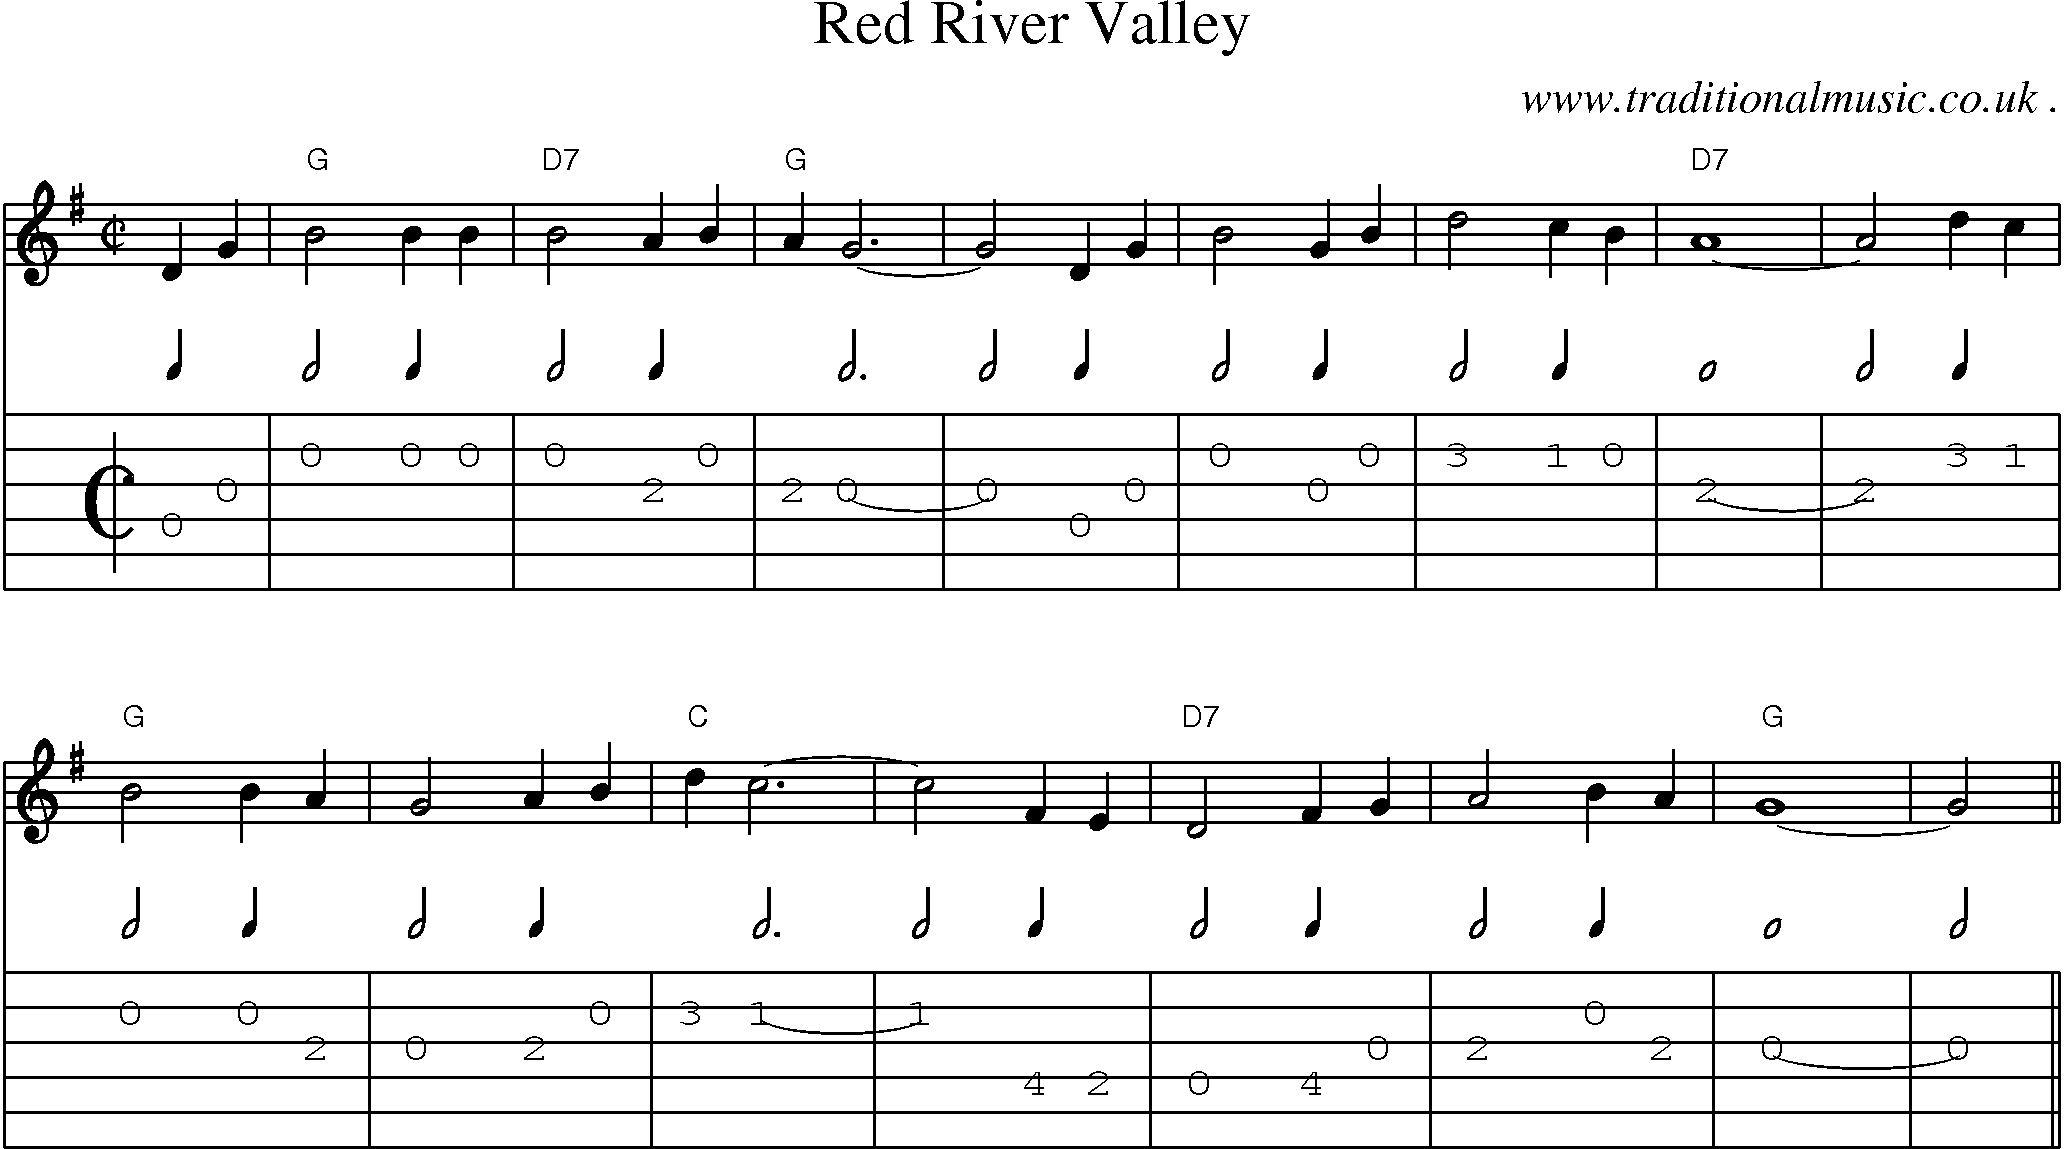 Music Score and Guitar Tabs for Red River Valley